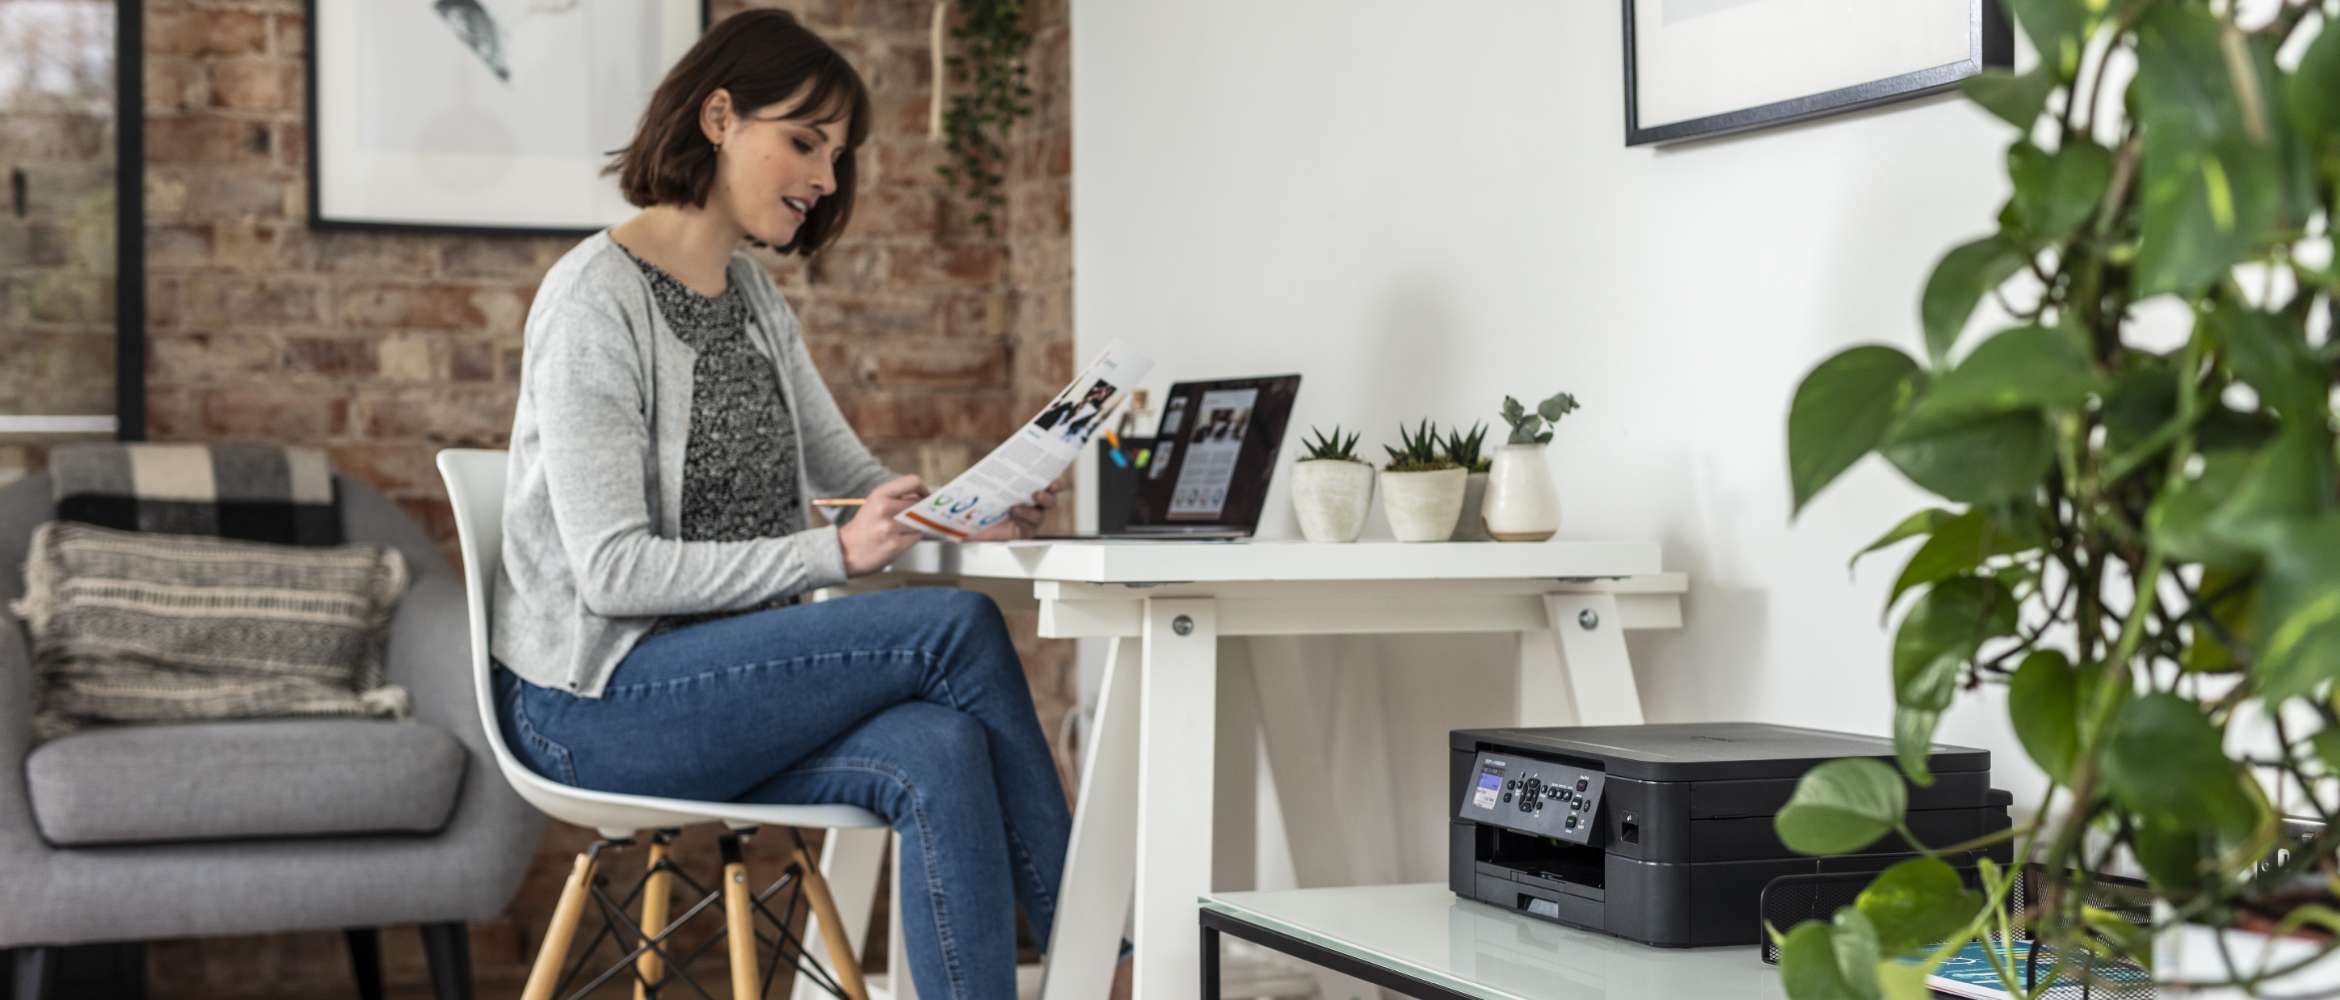 A woman is sat in her home office, working from home on her laptop. She is reviewing a business document that she has printed from her compact Brother printer which is in the foreground. 